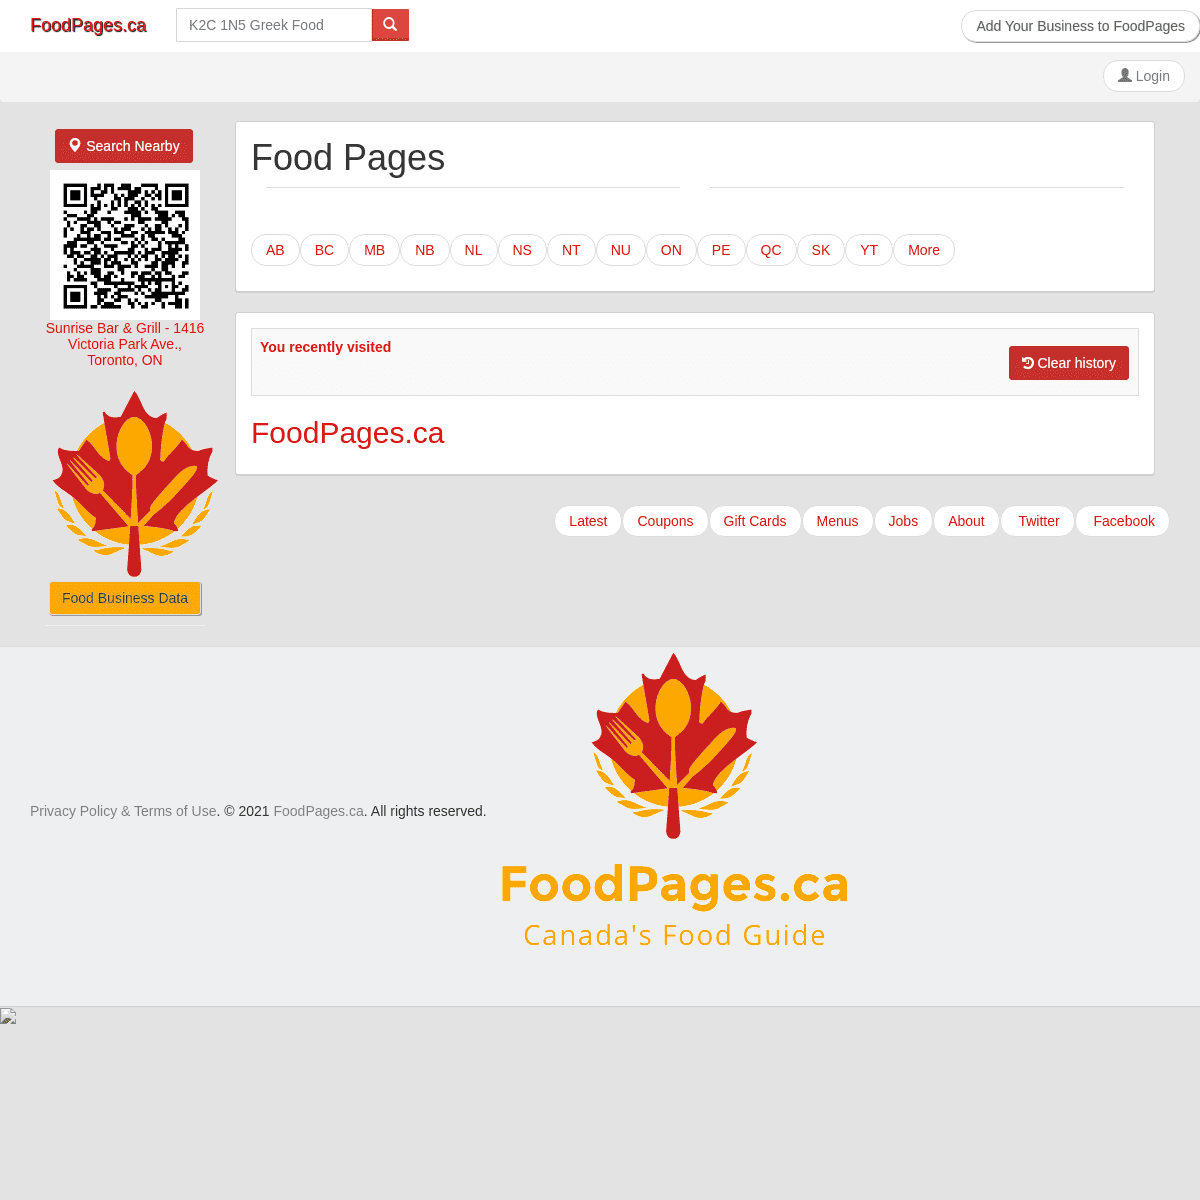 A complete backup of https://foodpages.ca